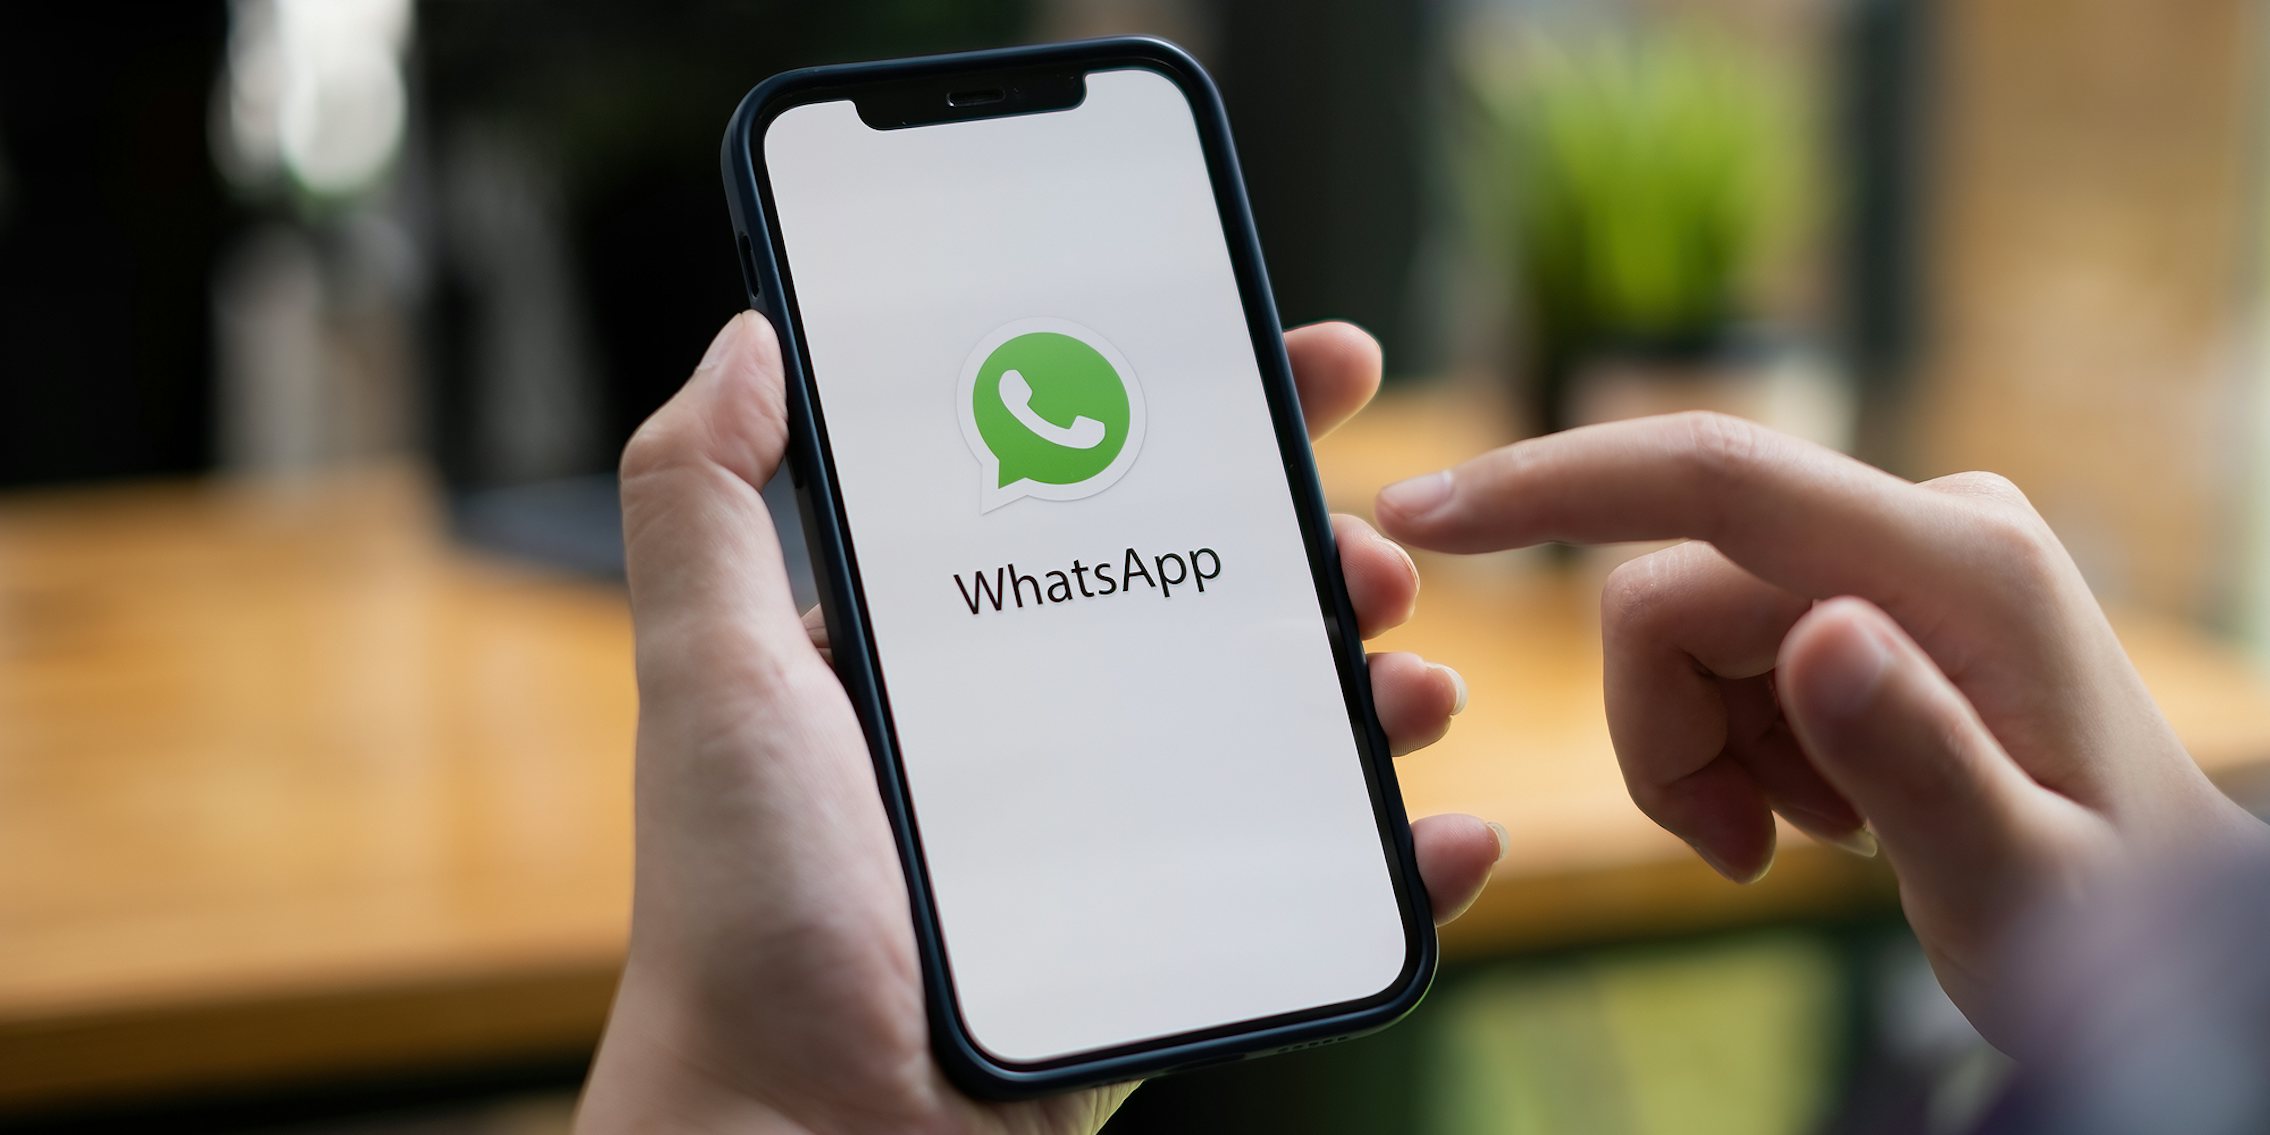 WhatsApp on phone screen in hand in front of blurry desk background